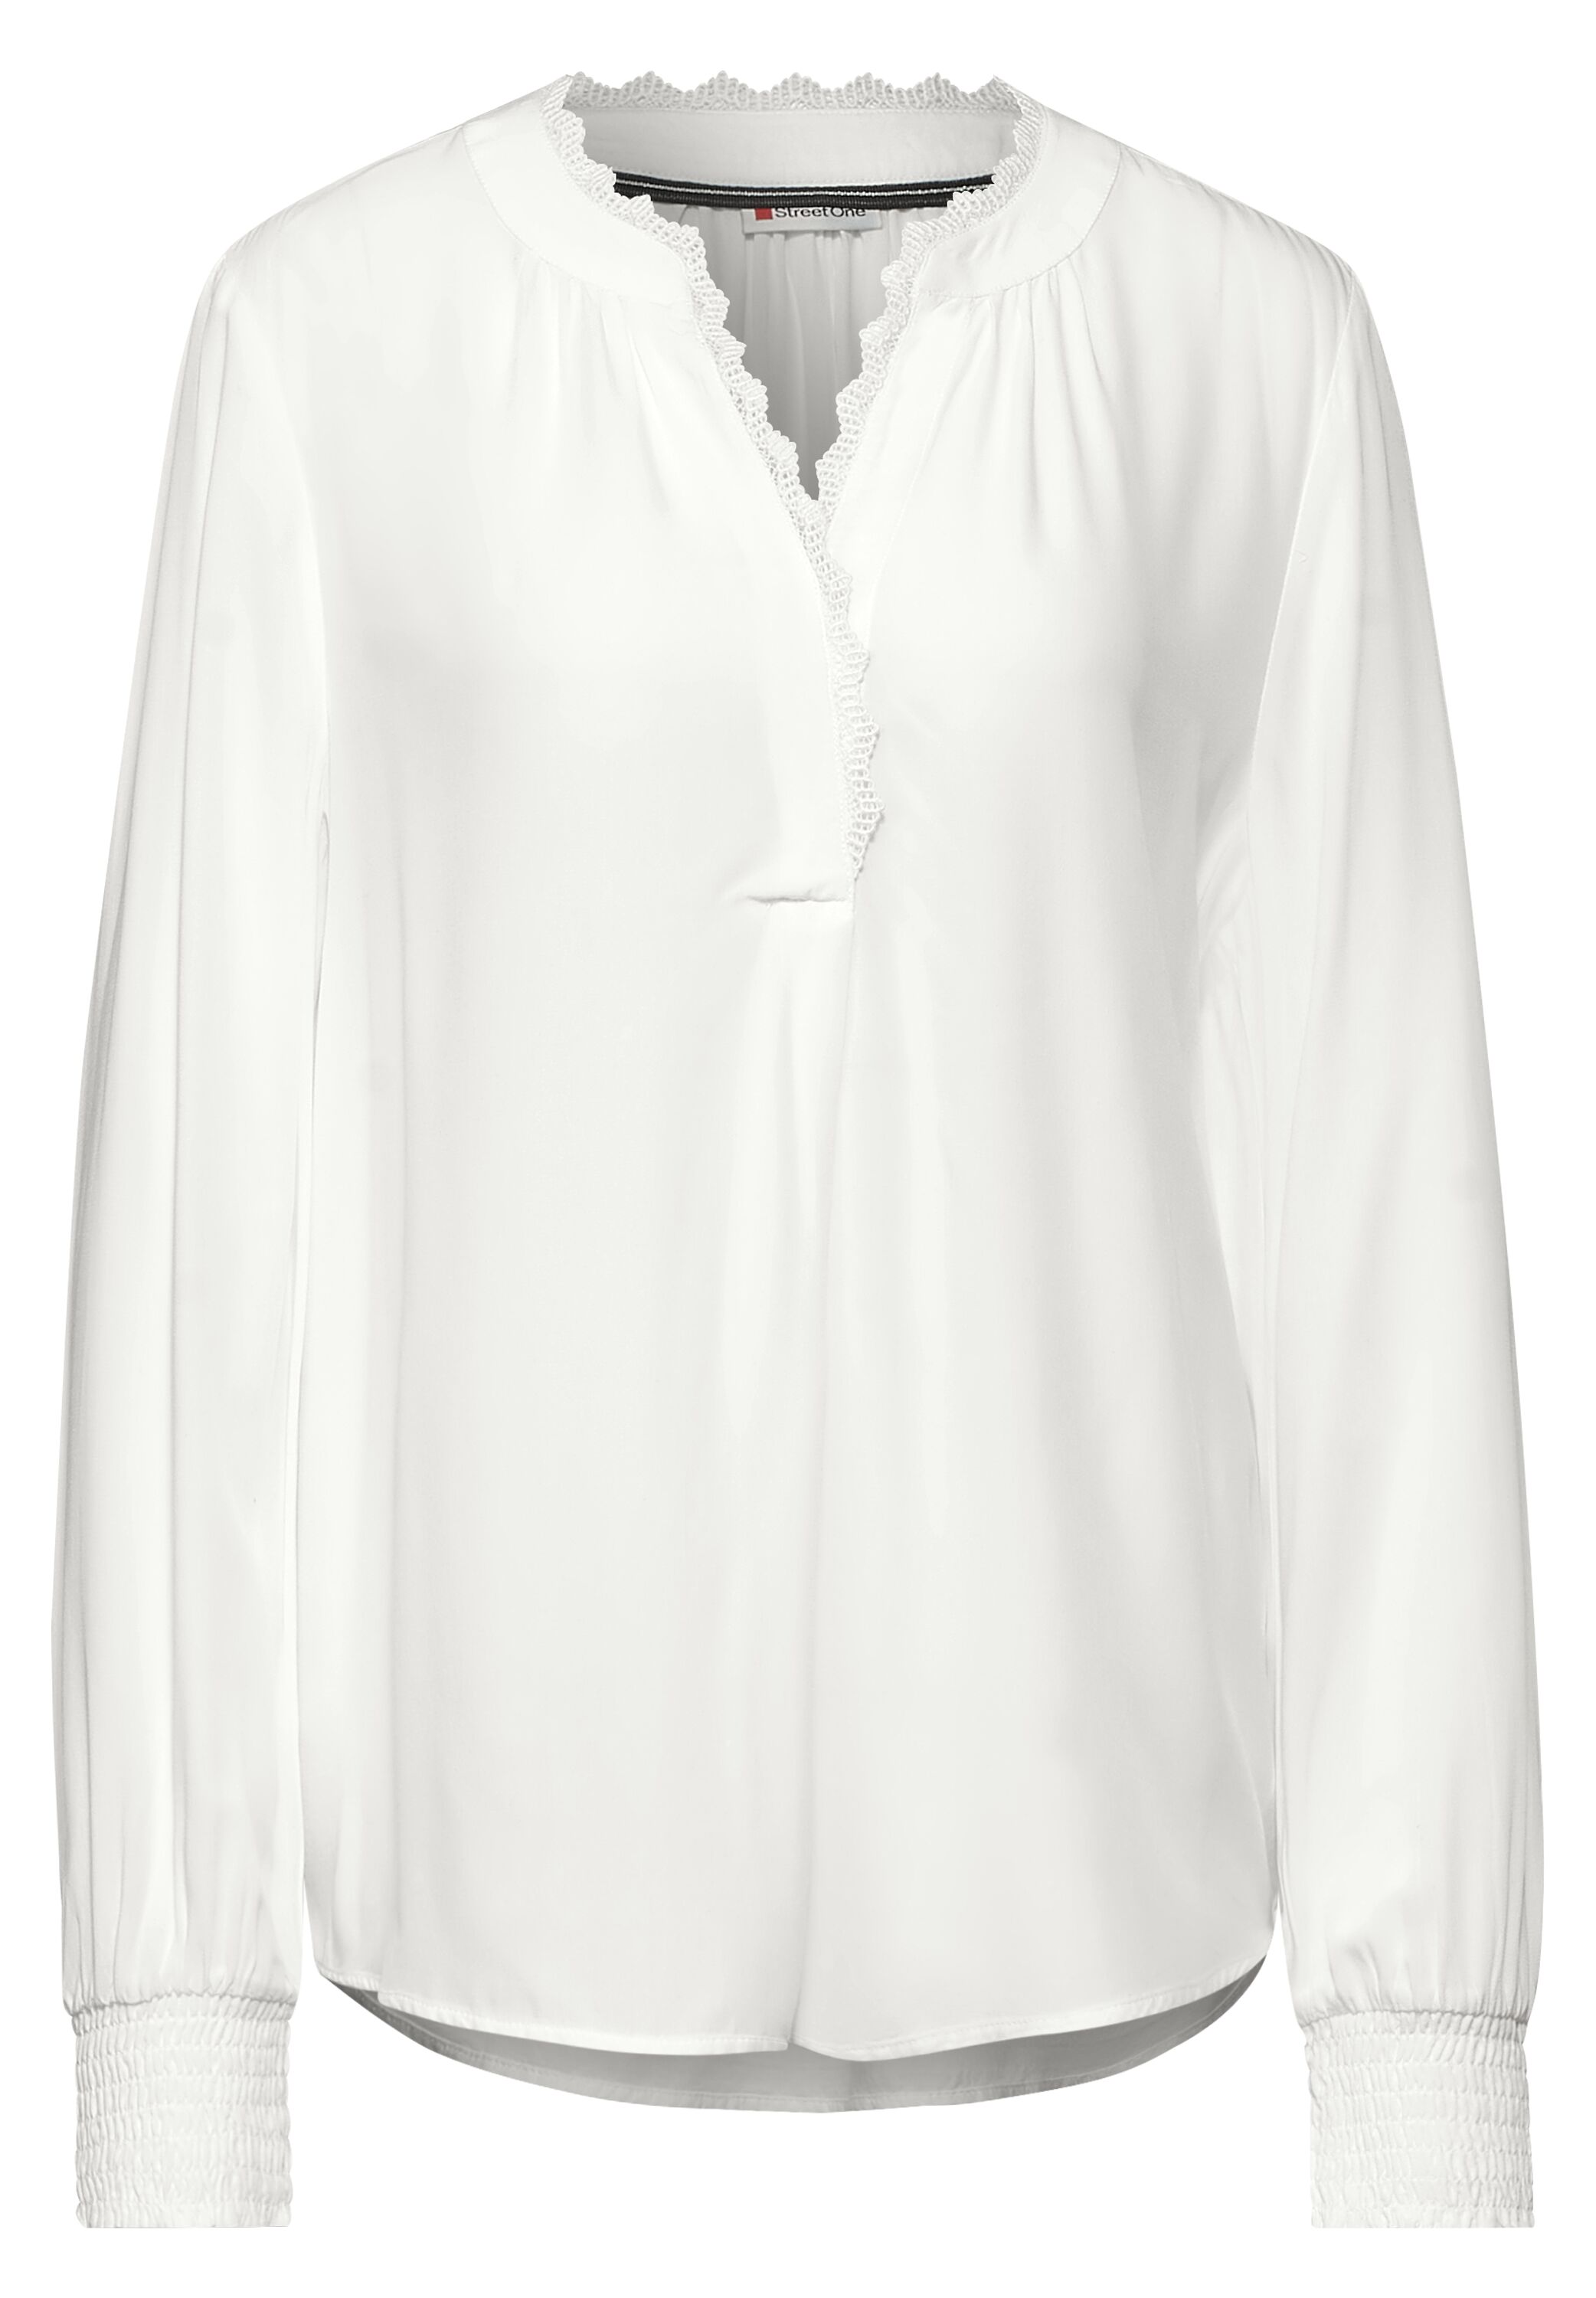 A342339-10108 Mode Street Off Bluse One CONCEPT in White -